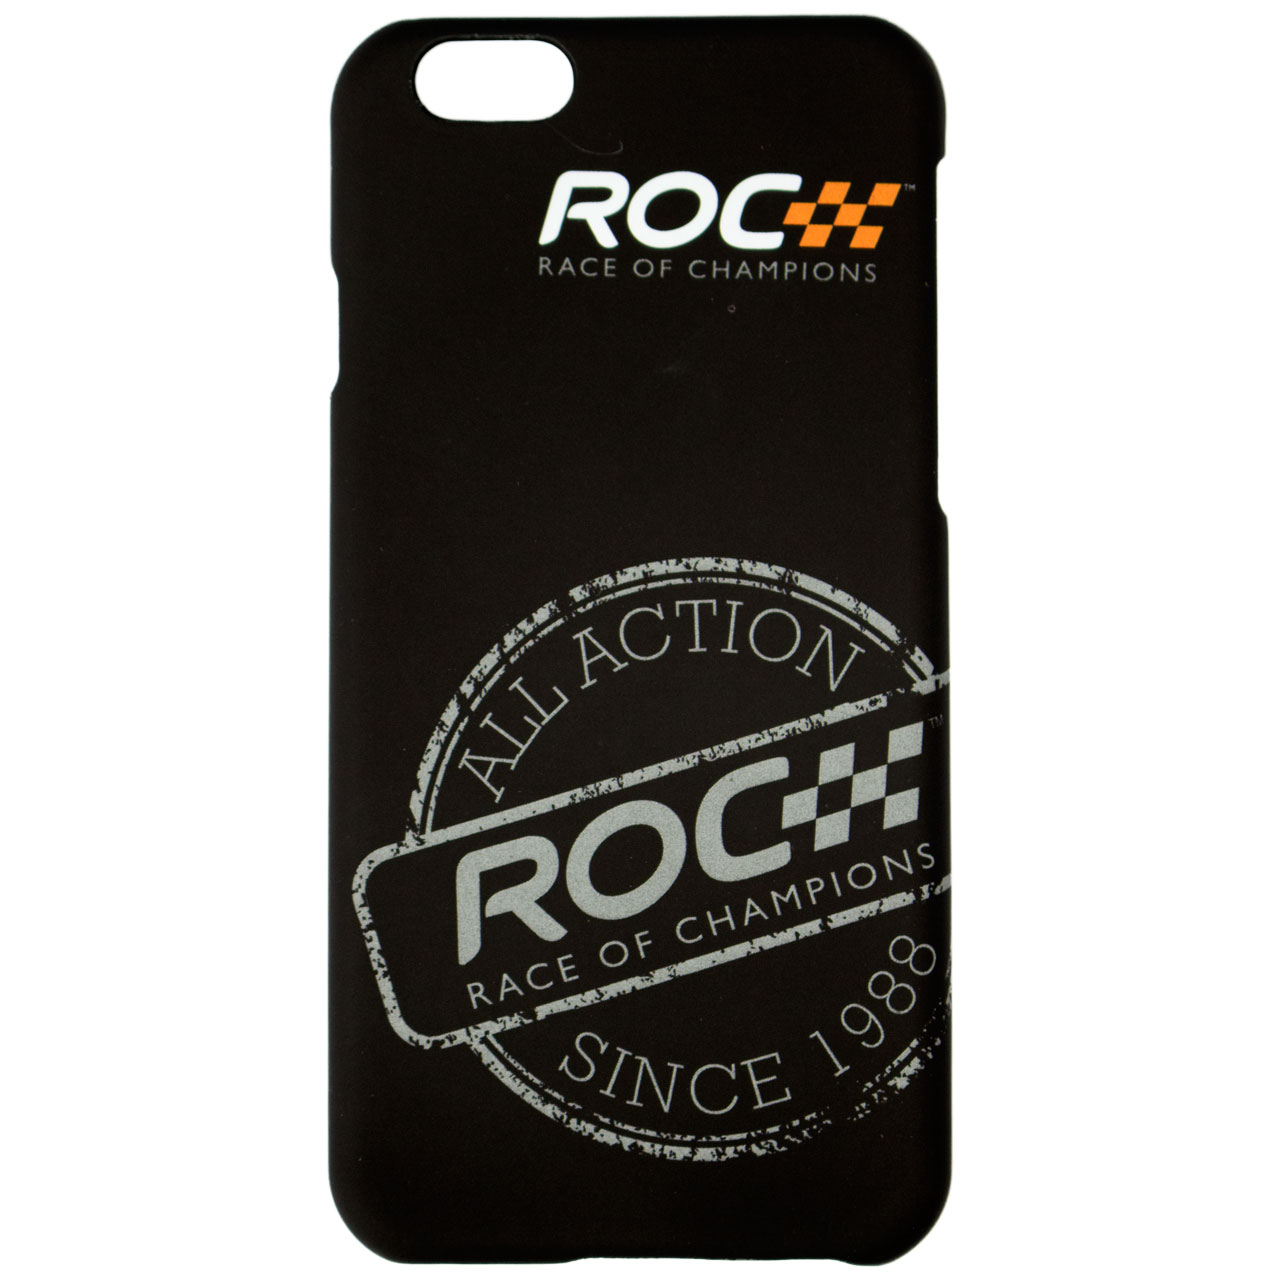 ROC Race of Champions Phone Cover iPhone 6 / s *